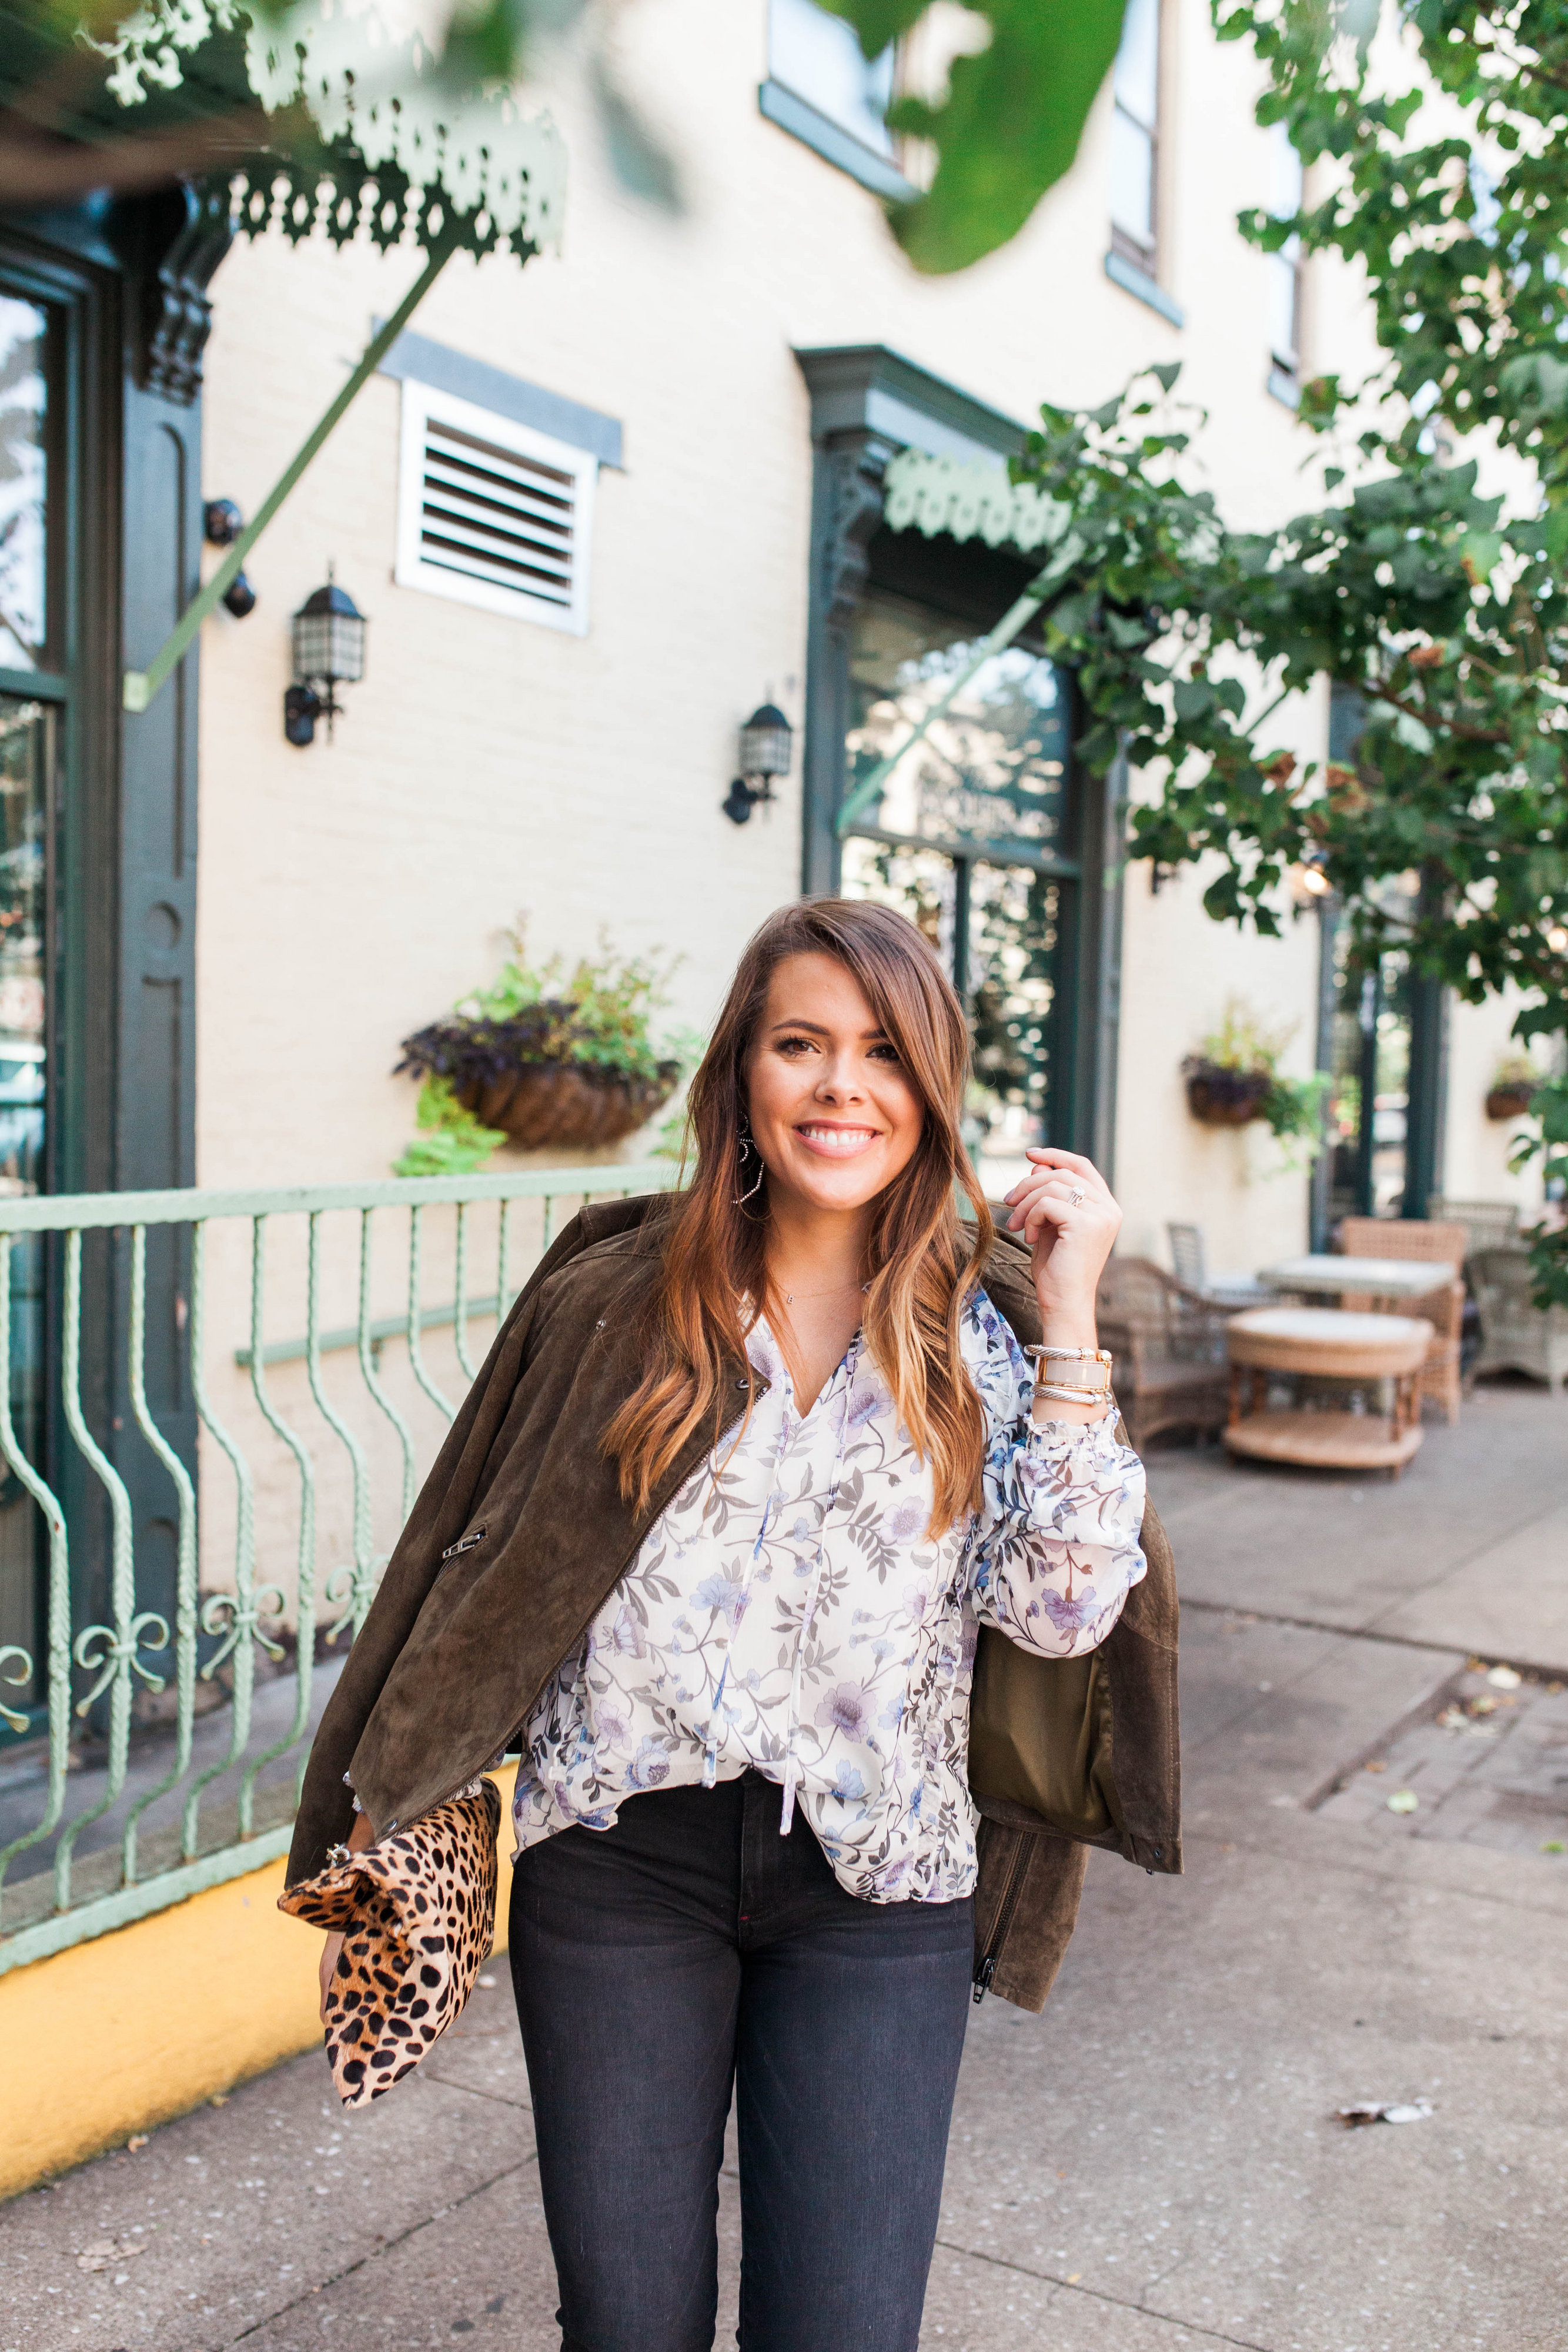 How to Wear a White Blouse for Fall / Casual Fall Outfit